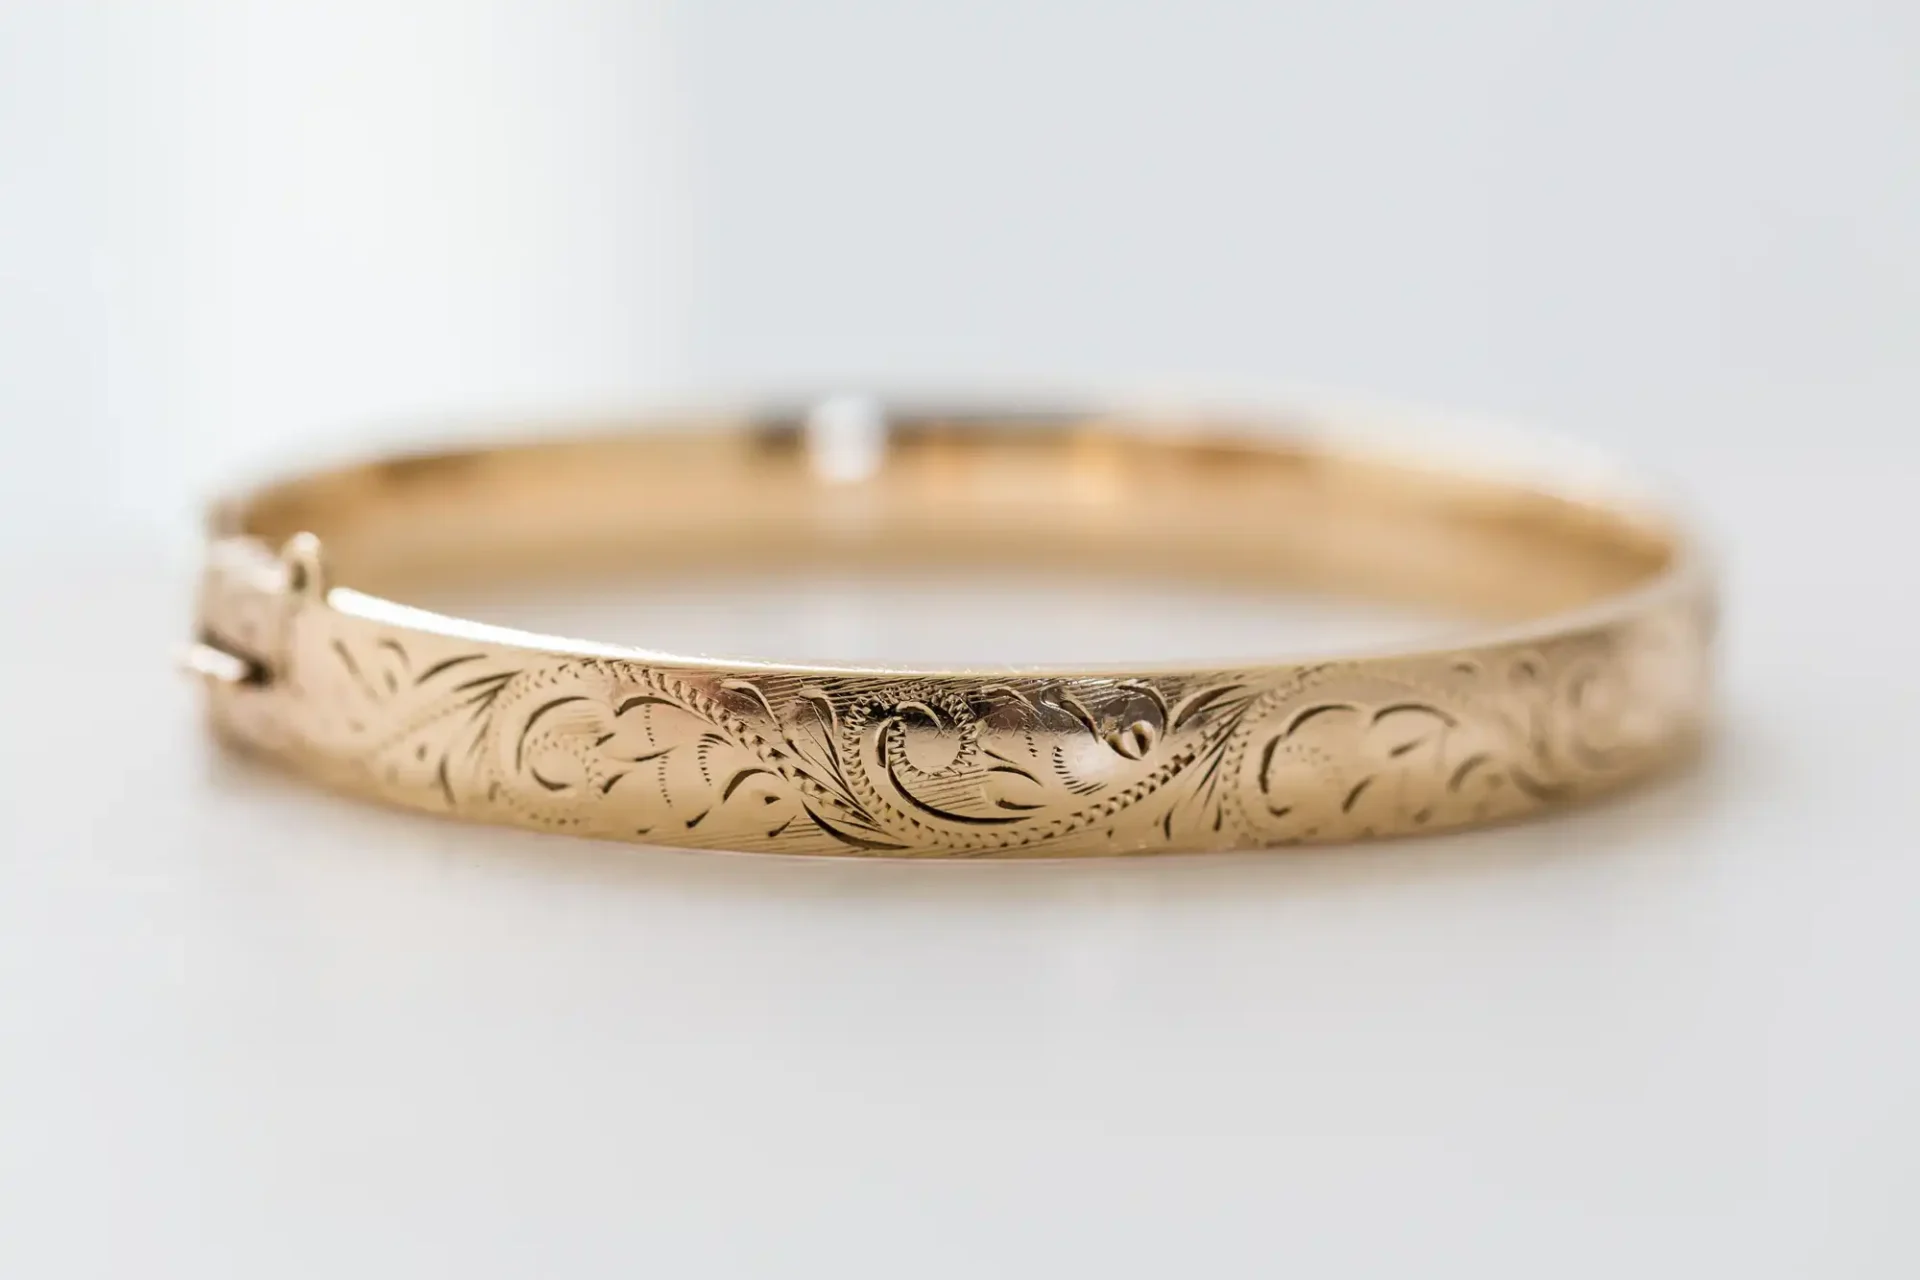 Gold bracelet with intricate floral engraving, displayed against a soft white background.